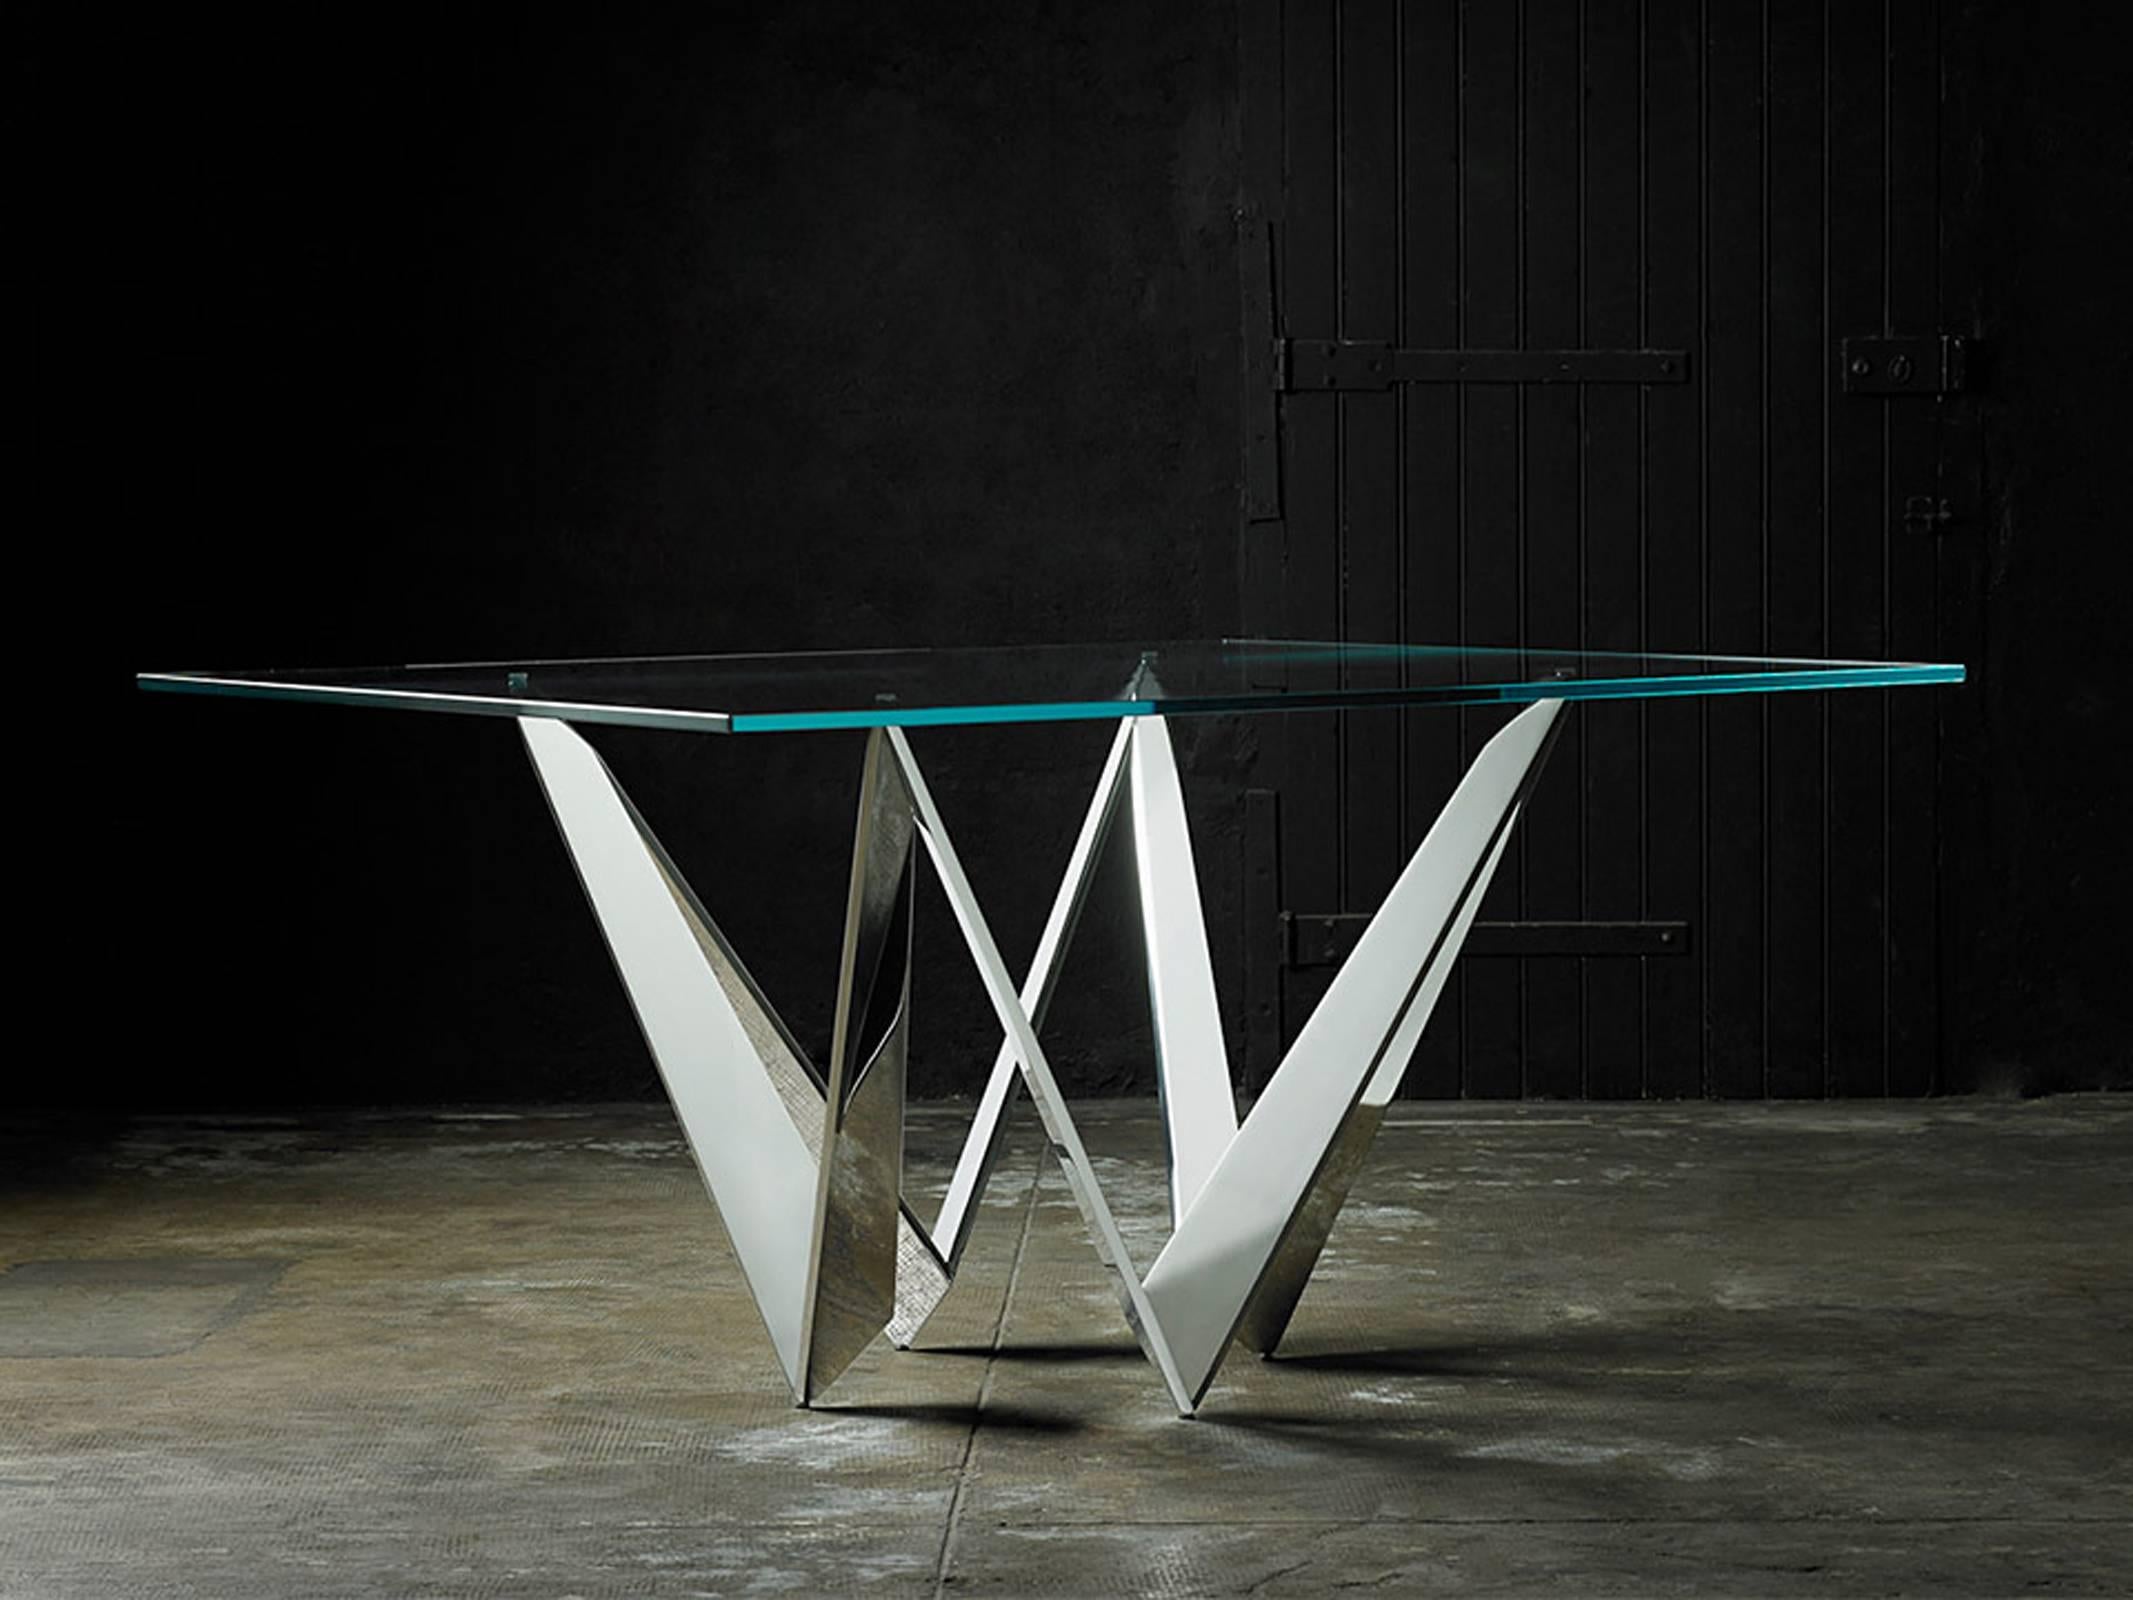 Table starway with polished mirror stainless steel base
structure. With 15 mm thick tempered square glass top.
Square table: L 140 x D 140 x H 74cm. Price: 16500,00€.
Rectangular table: L210xD110xH74cm. Price: 21900,00€.
Round table: Ø150xH74cm.